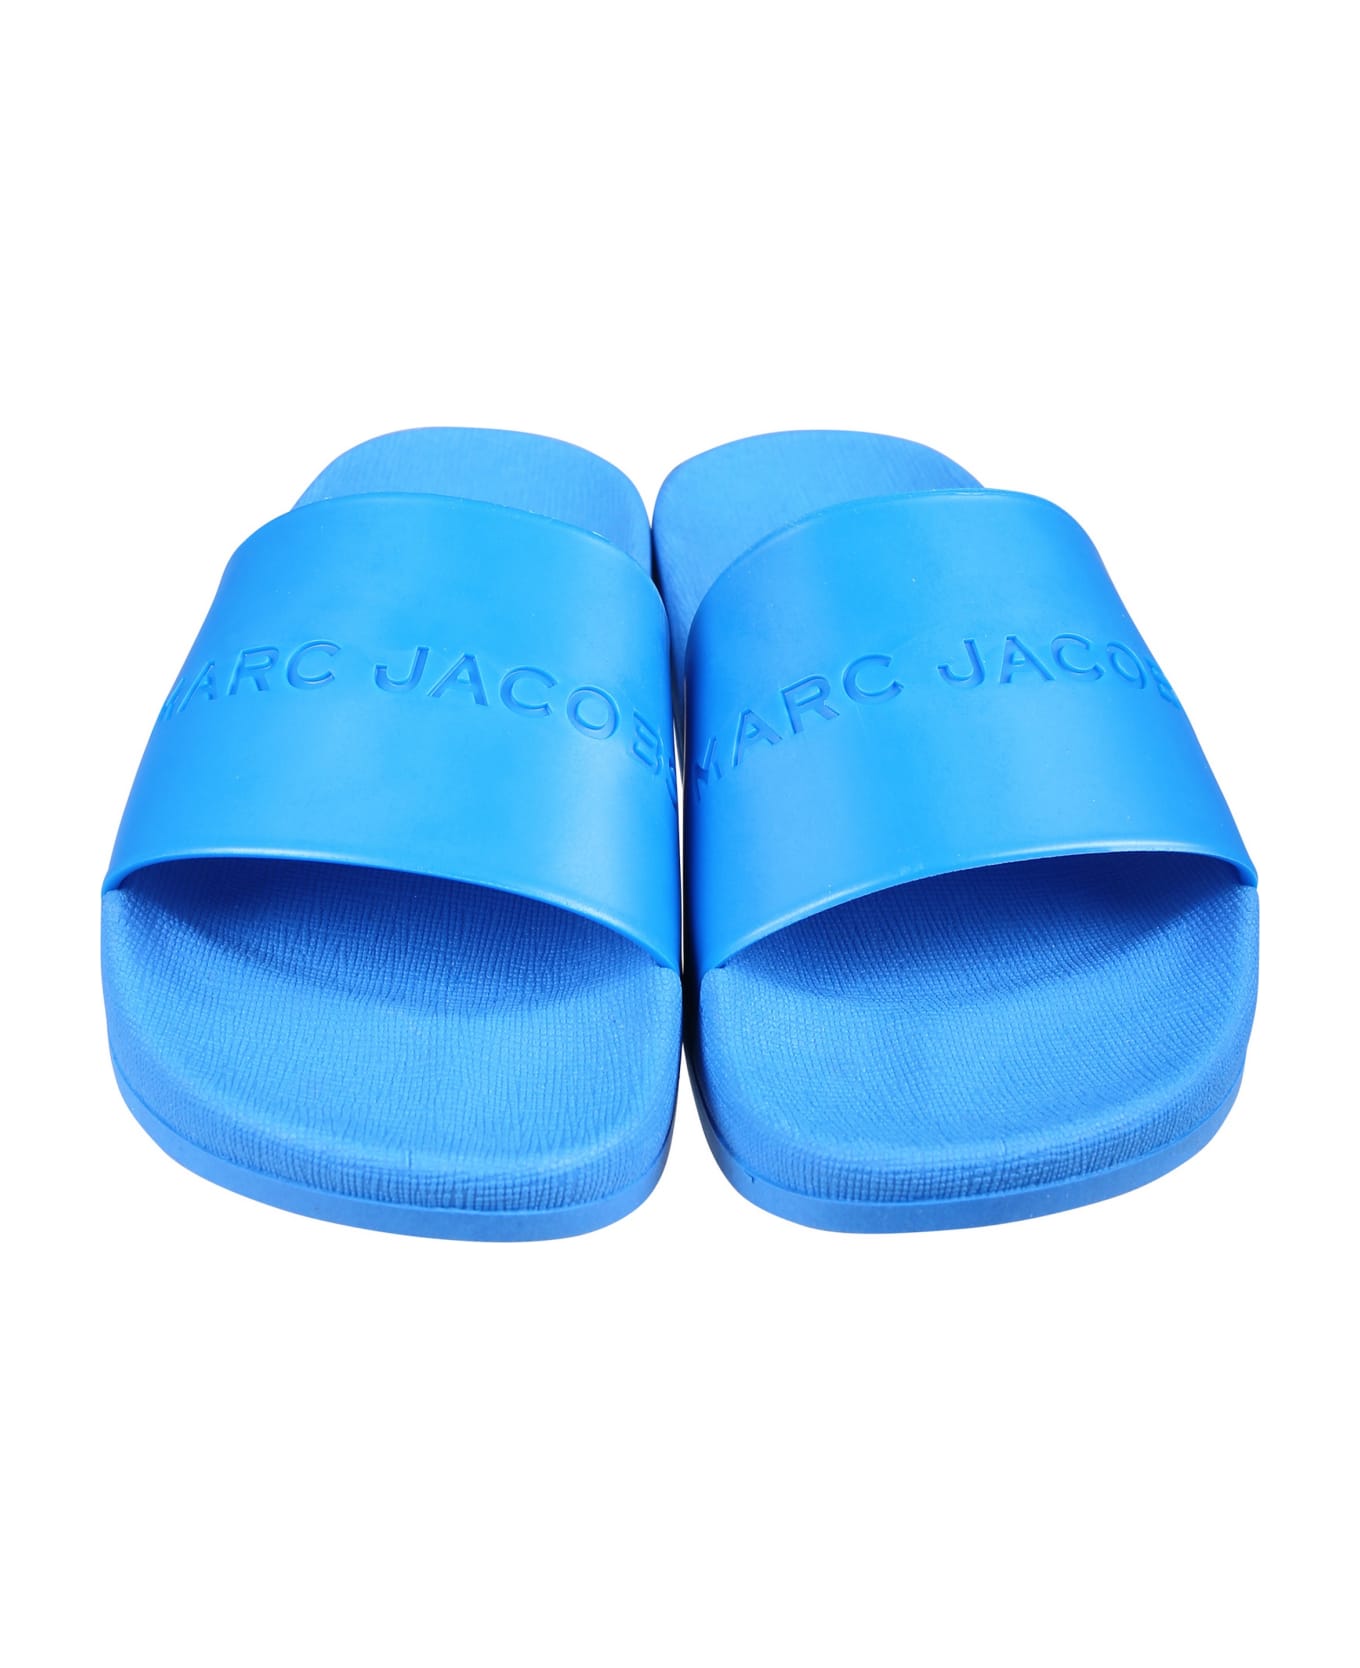 Little Marc Jacobs Blue Slippers For Kids With Logo - Blue